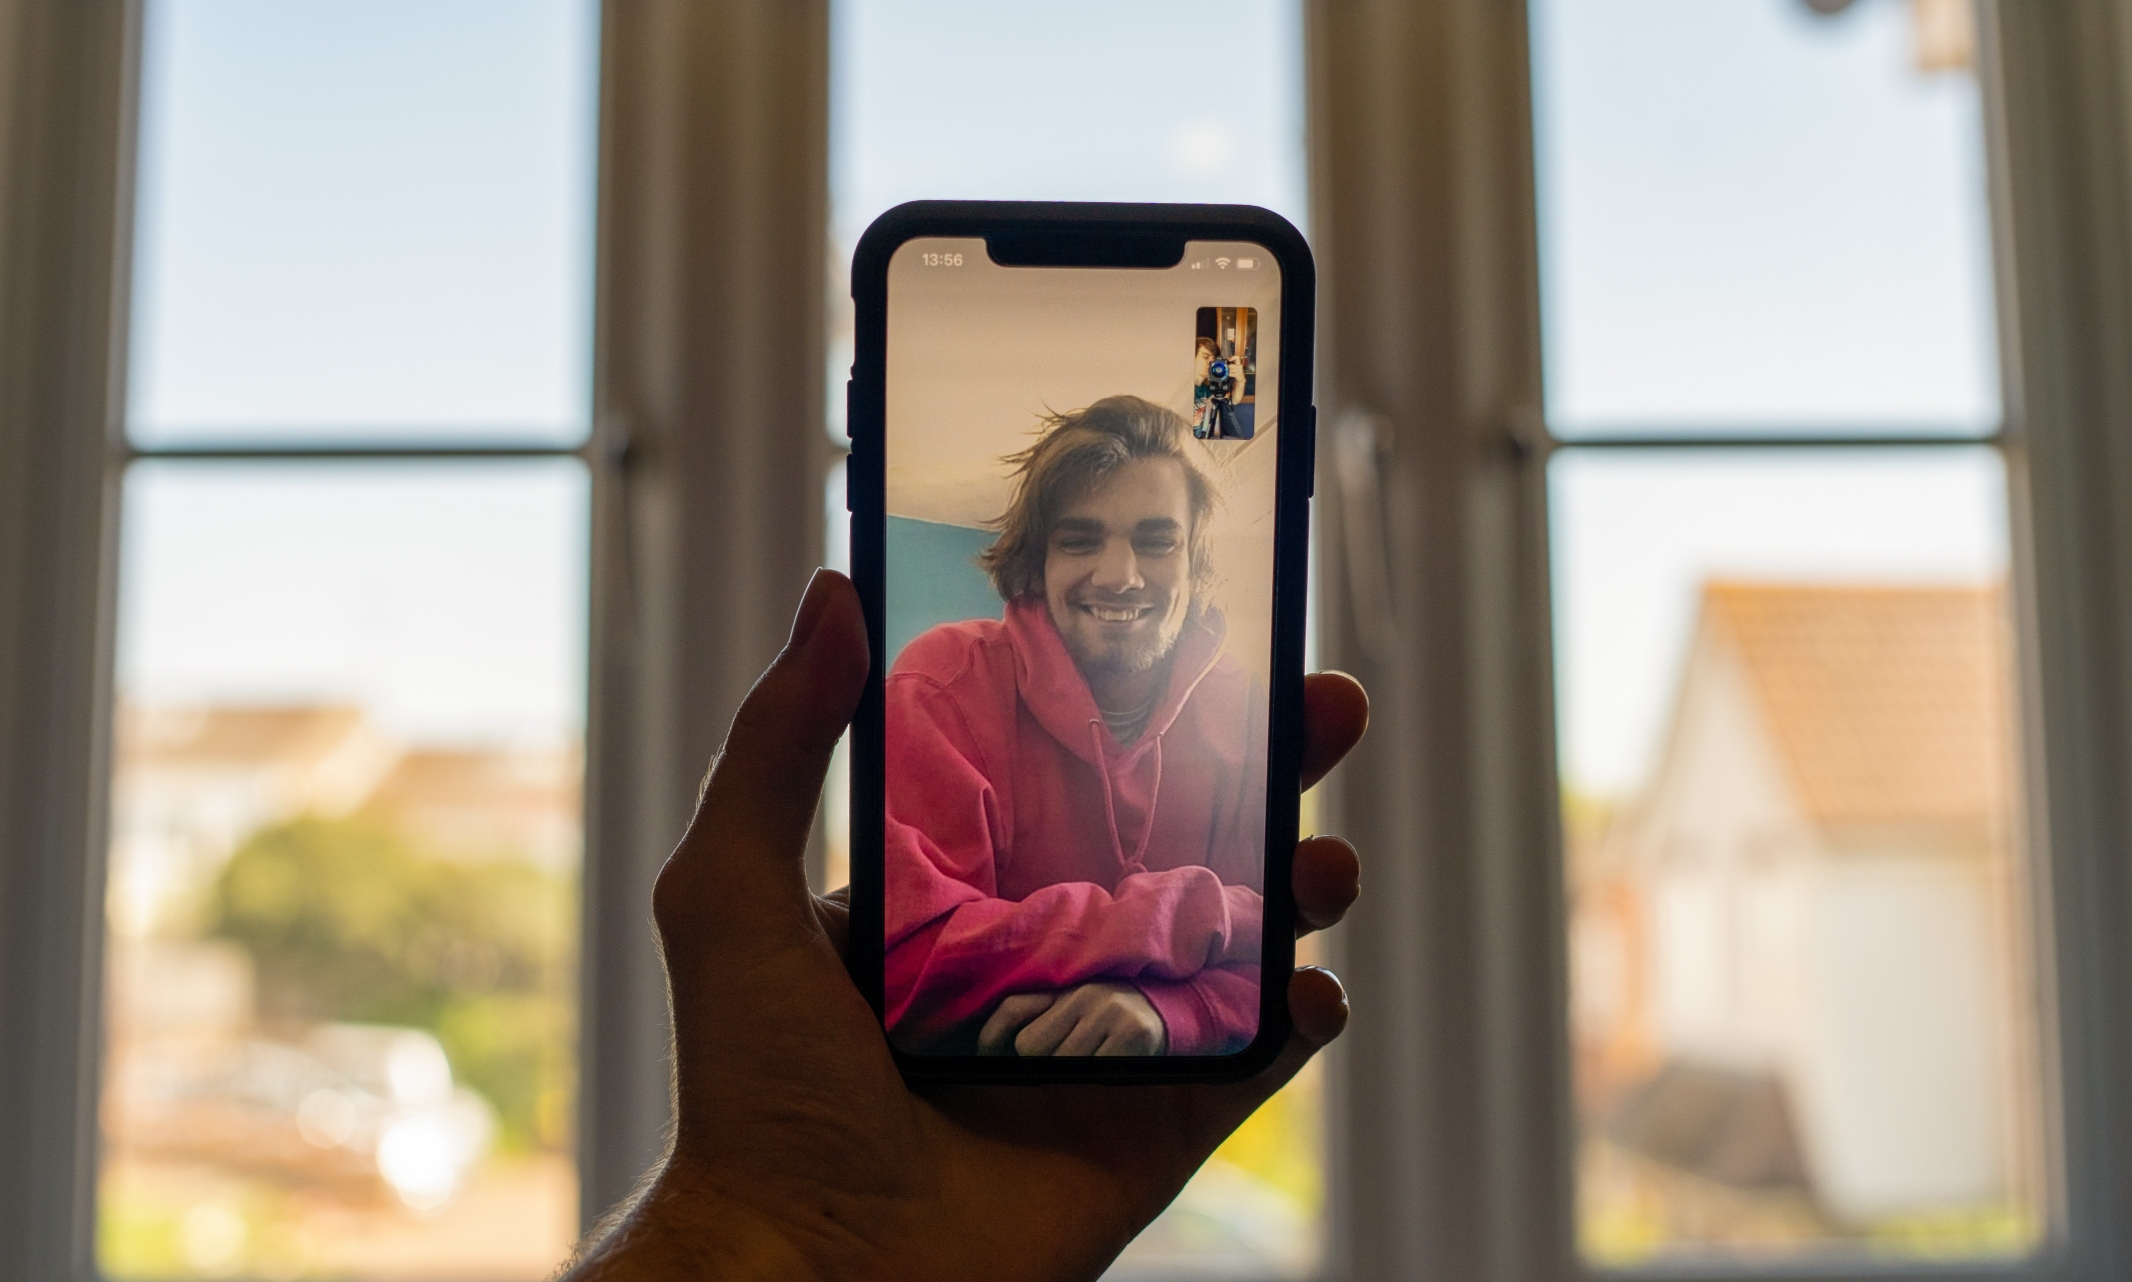 photo of someone holding a phone up while video chatting with a friend